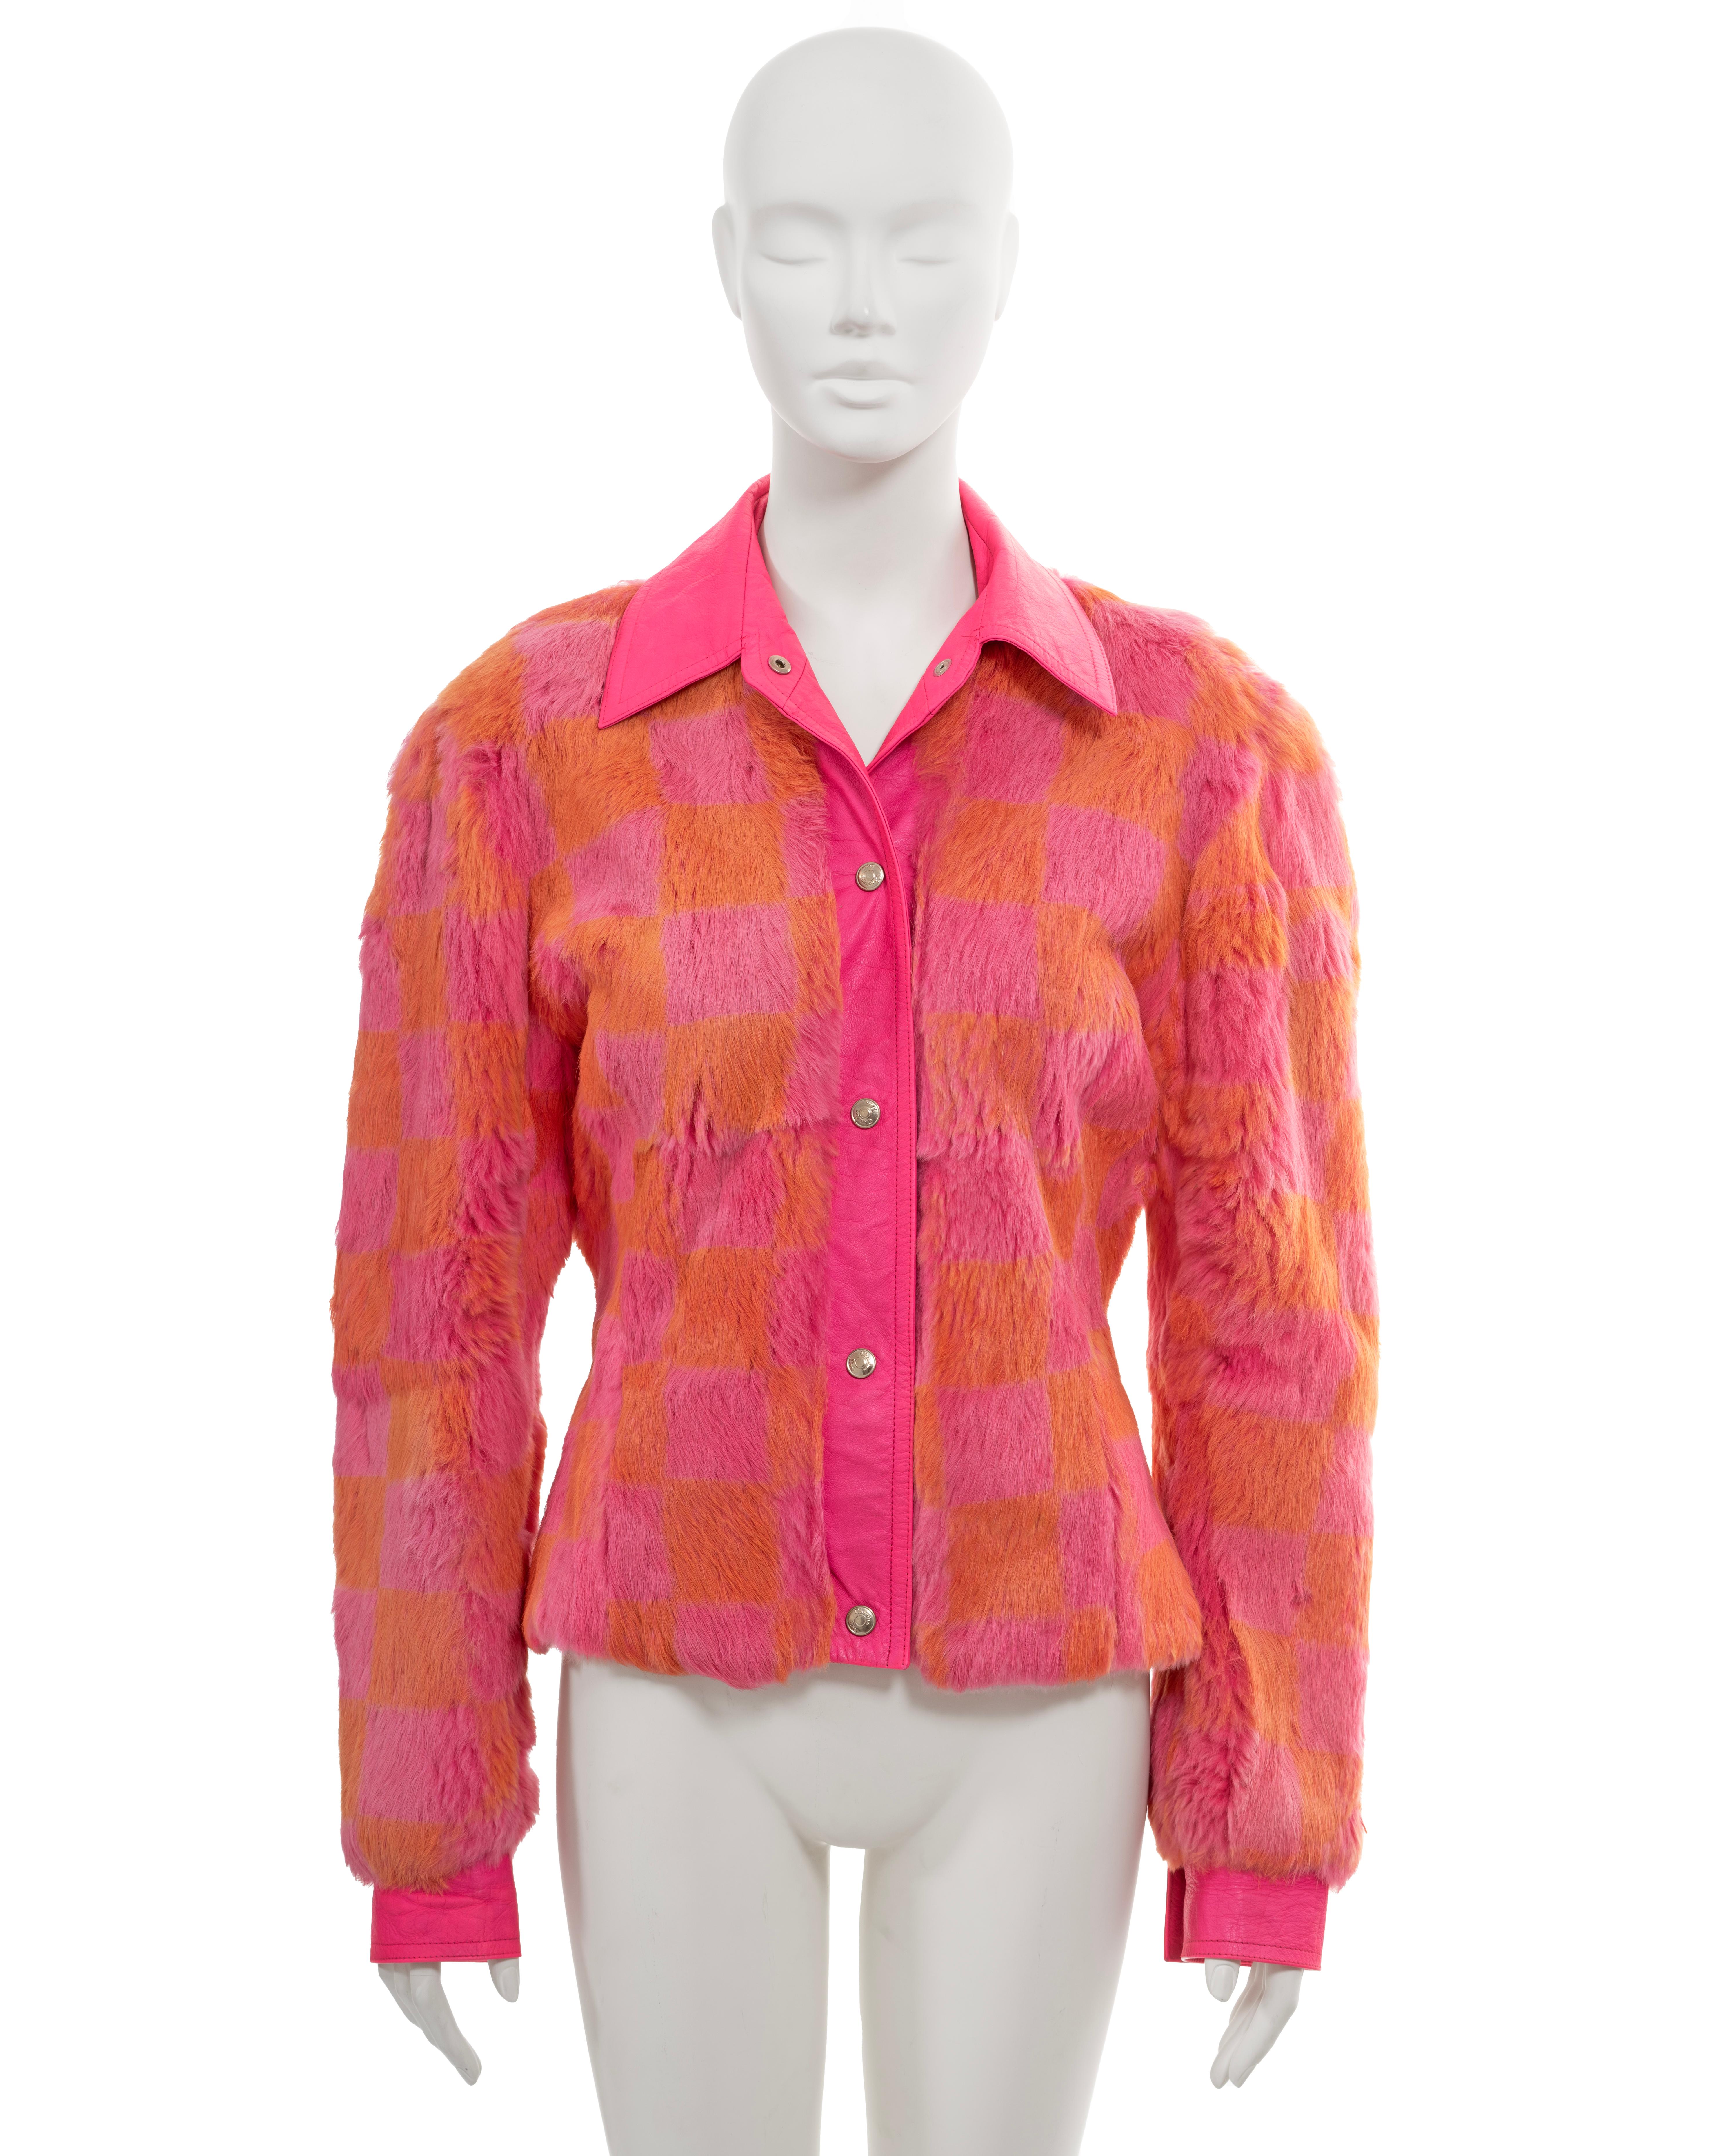 ▪ Christian Dior fur shirt jacket
▪ Creative Director: John Galliano
▪ Fall-Winter 2001
▪ Sold by One of a Kind Archive
▪ Rabbit fur, meticulously dyed in a pink and orange checkerboard print
▪ Accentuated with highlighter-pink leather trim
▪ Silver